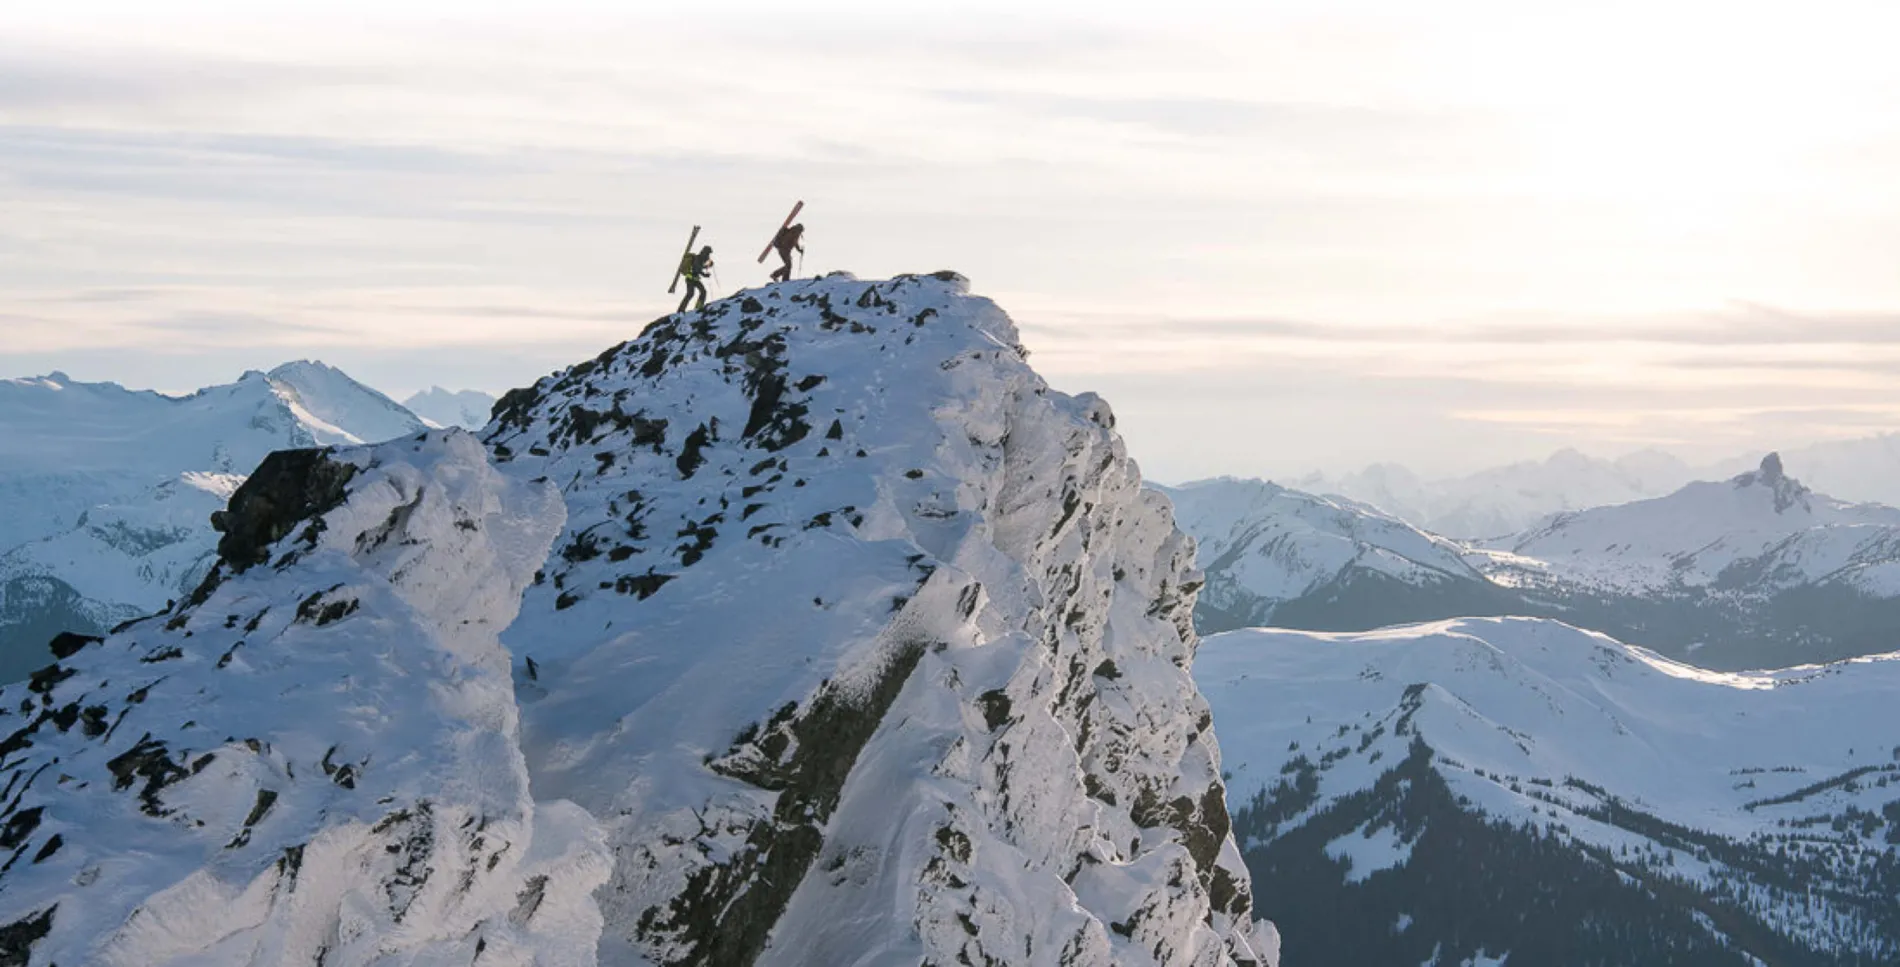 two skiers summiting a mountain at dusk with a full mountain range in the background